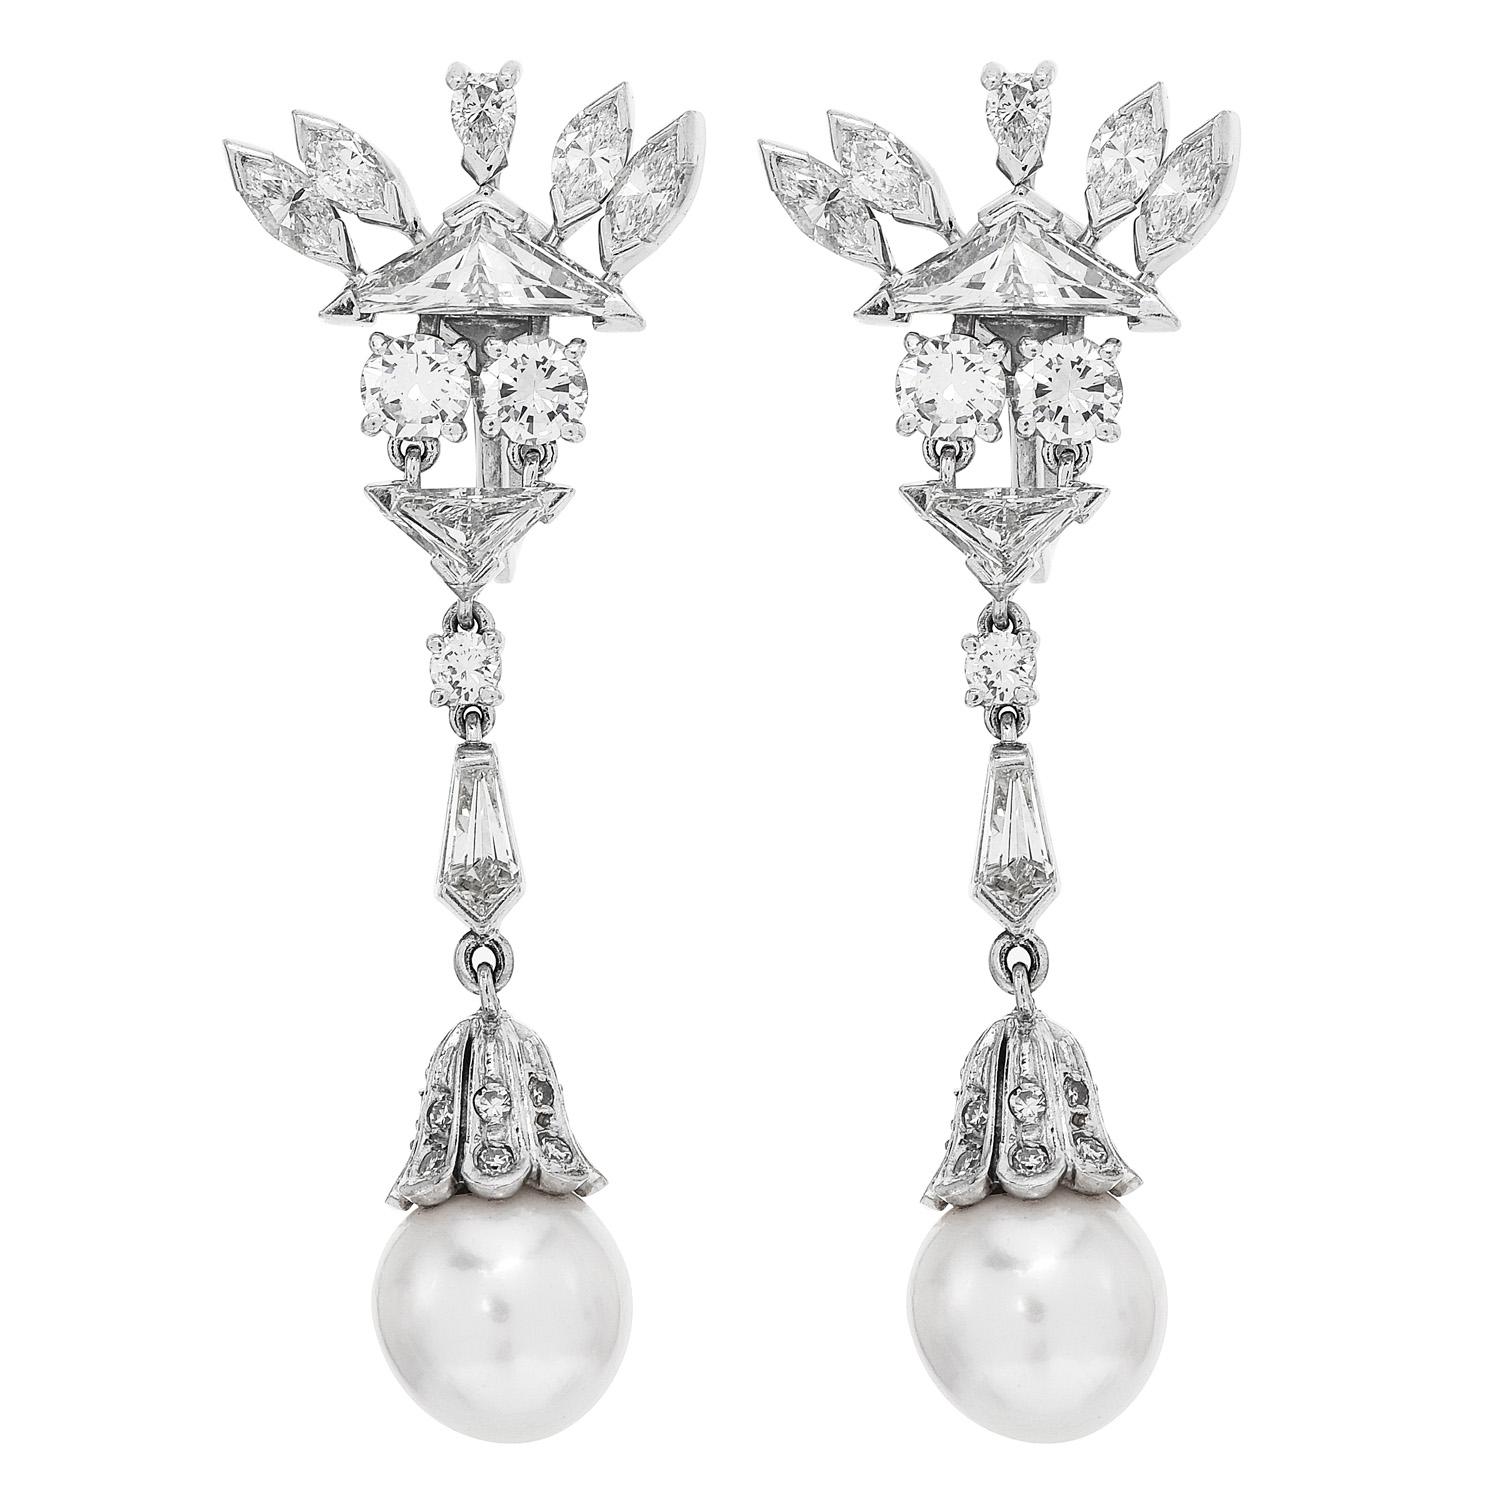 Indulge in the uniqueness of these vintage Akoya Pearl and

Diamond Earrings with Omega Backings! 

With (2) 9.5 mm Akoya Pearl centers, high Luster & Cream undertones,  complemented by the Mixed Cut, Diamonds,

The Geometric & Floral is a